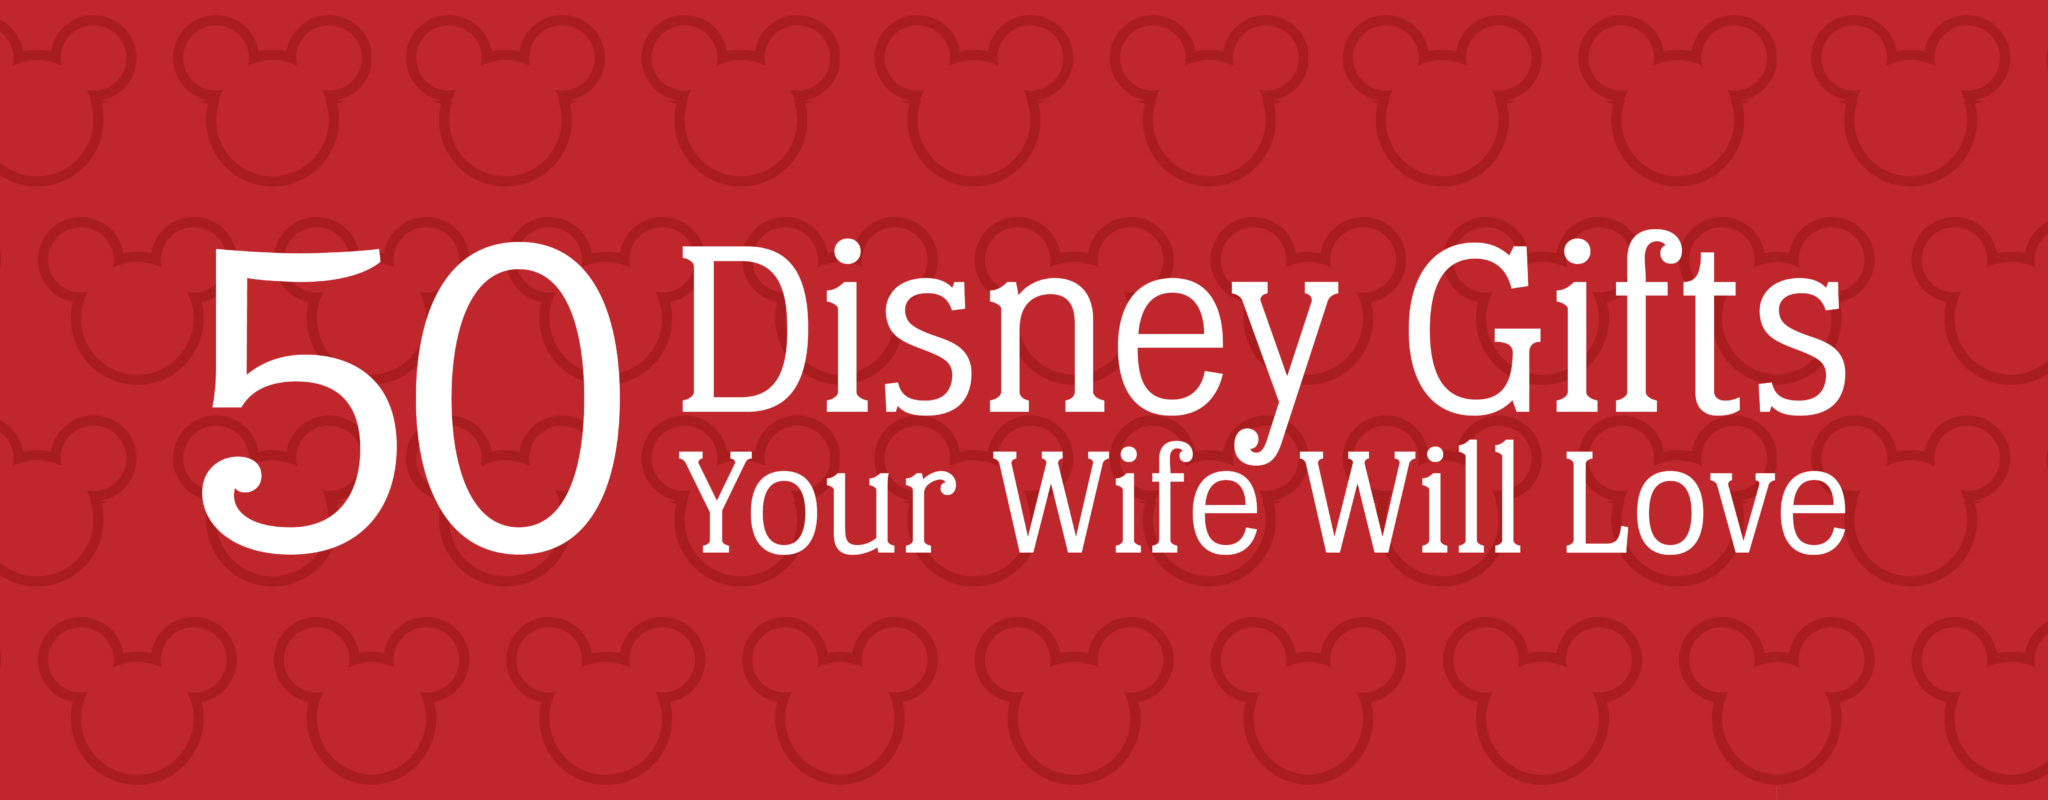 Disney Gifts for Women